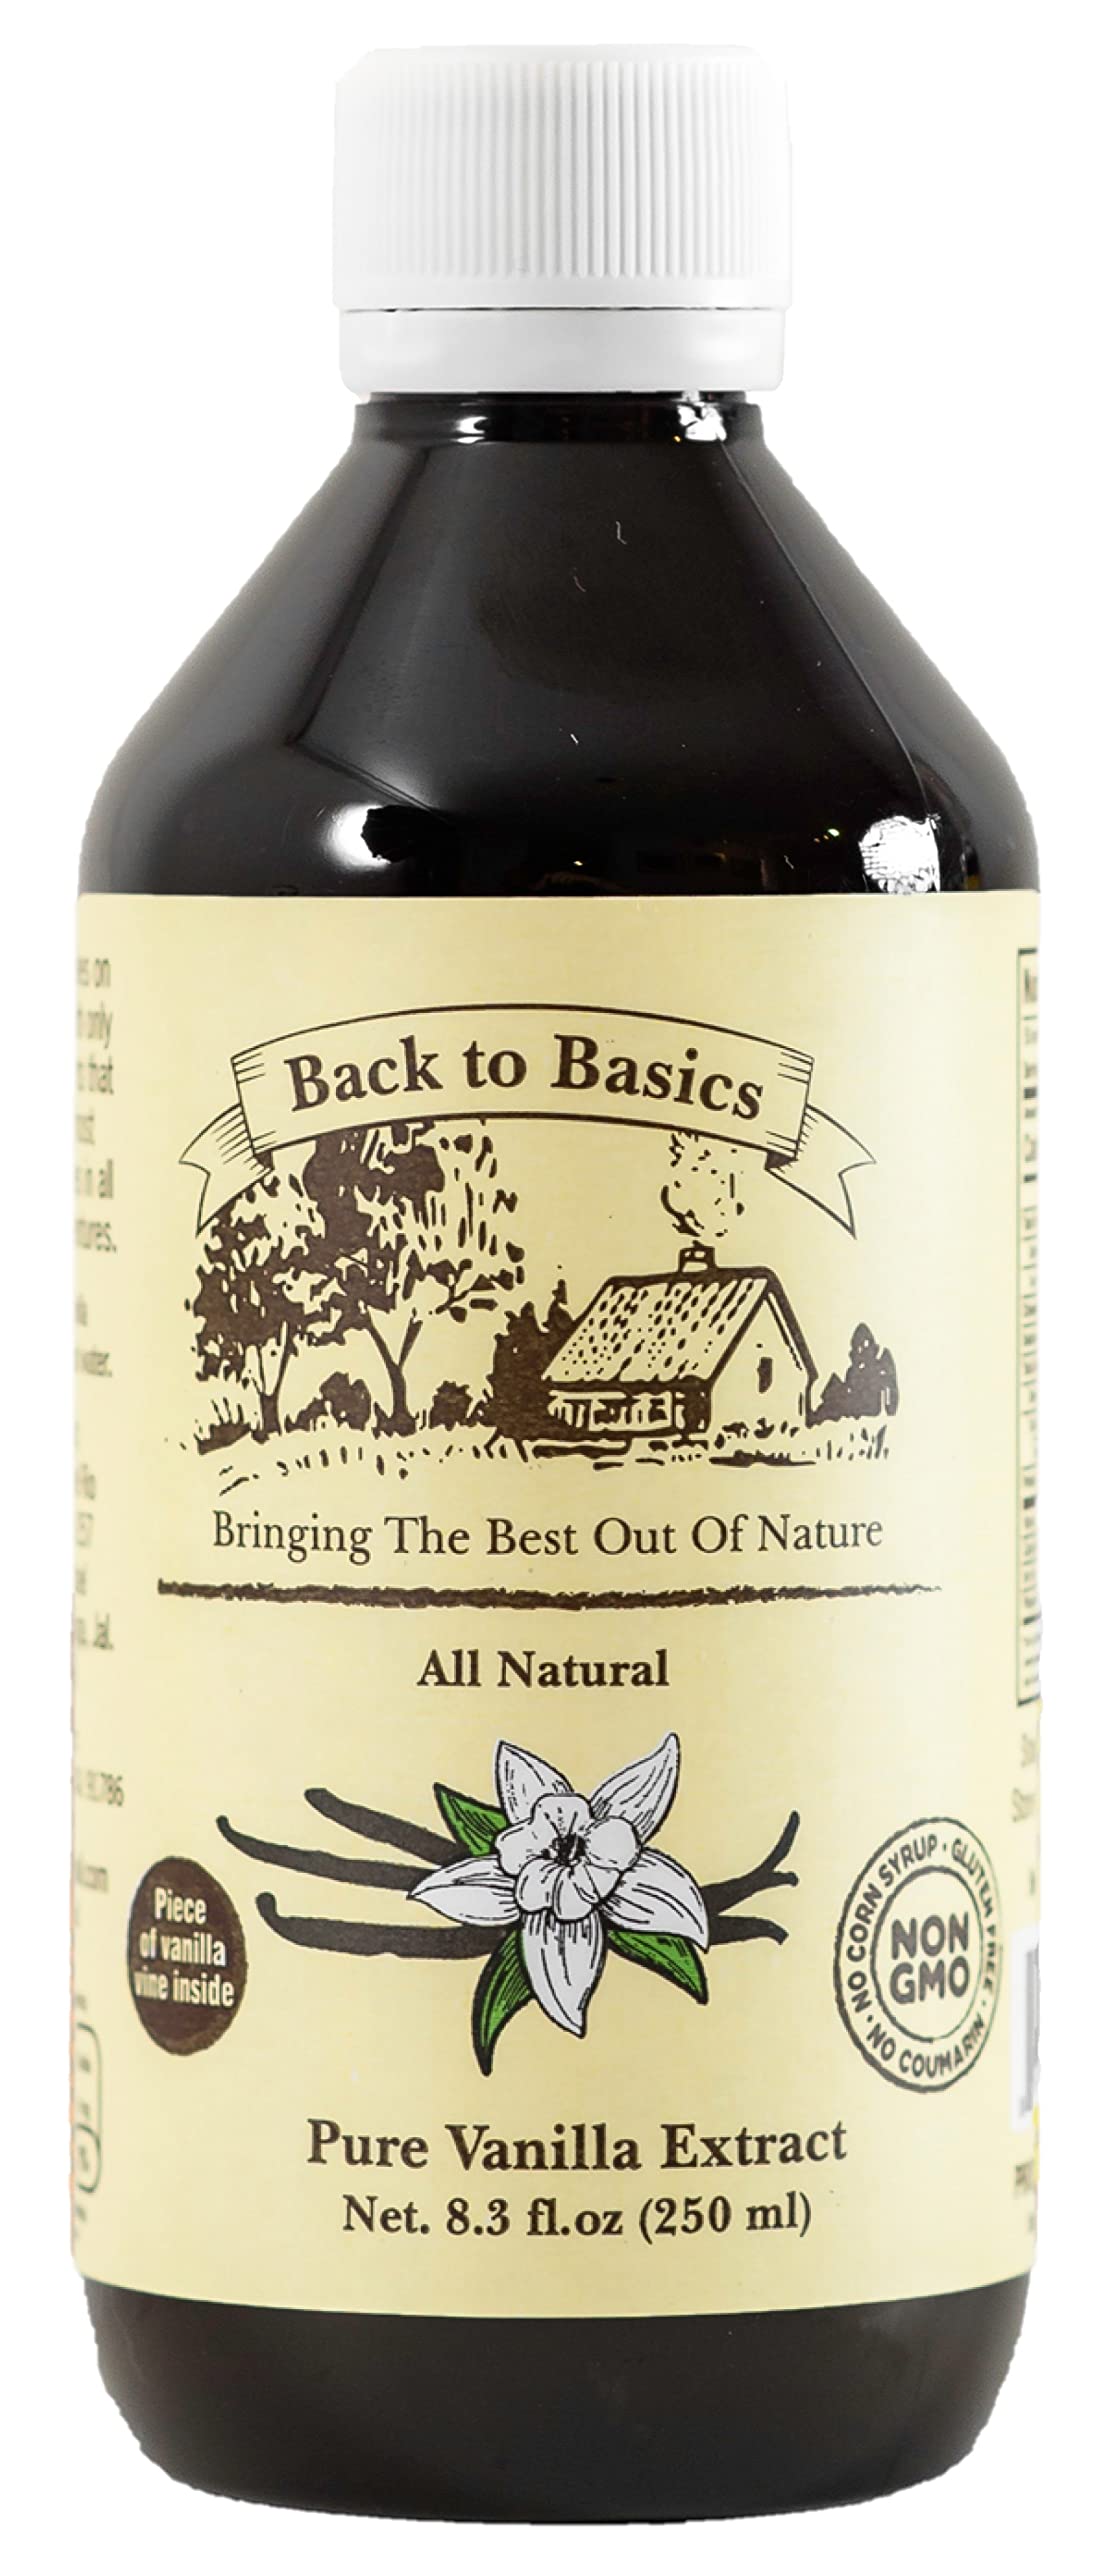 Back to Basics – All Natural - Pure Vanilla Extract – 8 oz – Mexican Vanilla – To Enhance Flavors in Cooking, Baking, and Dessert Making